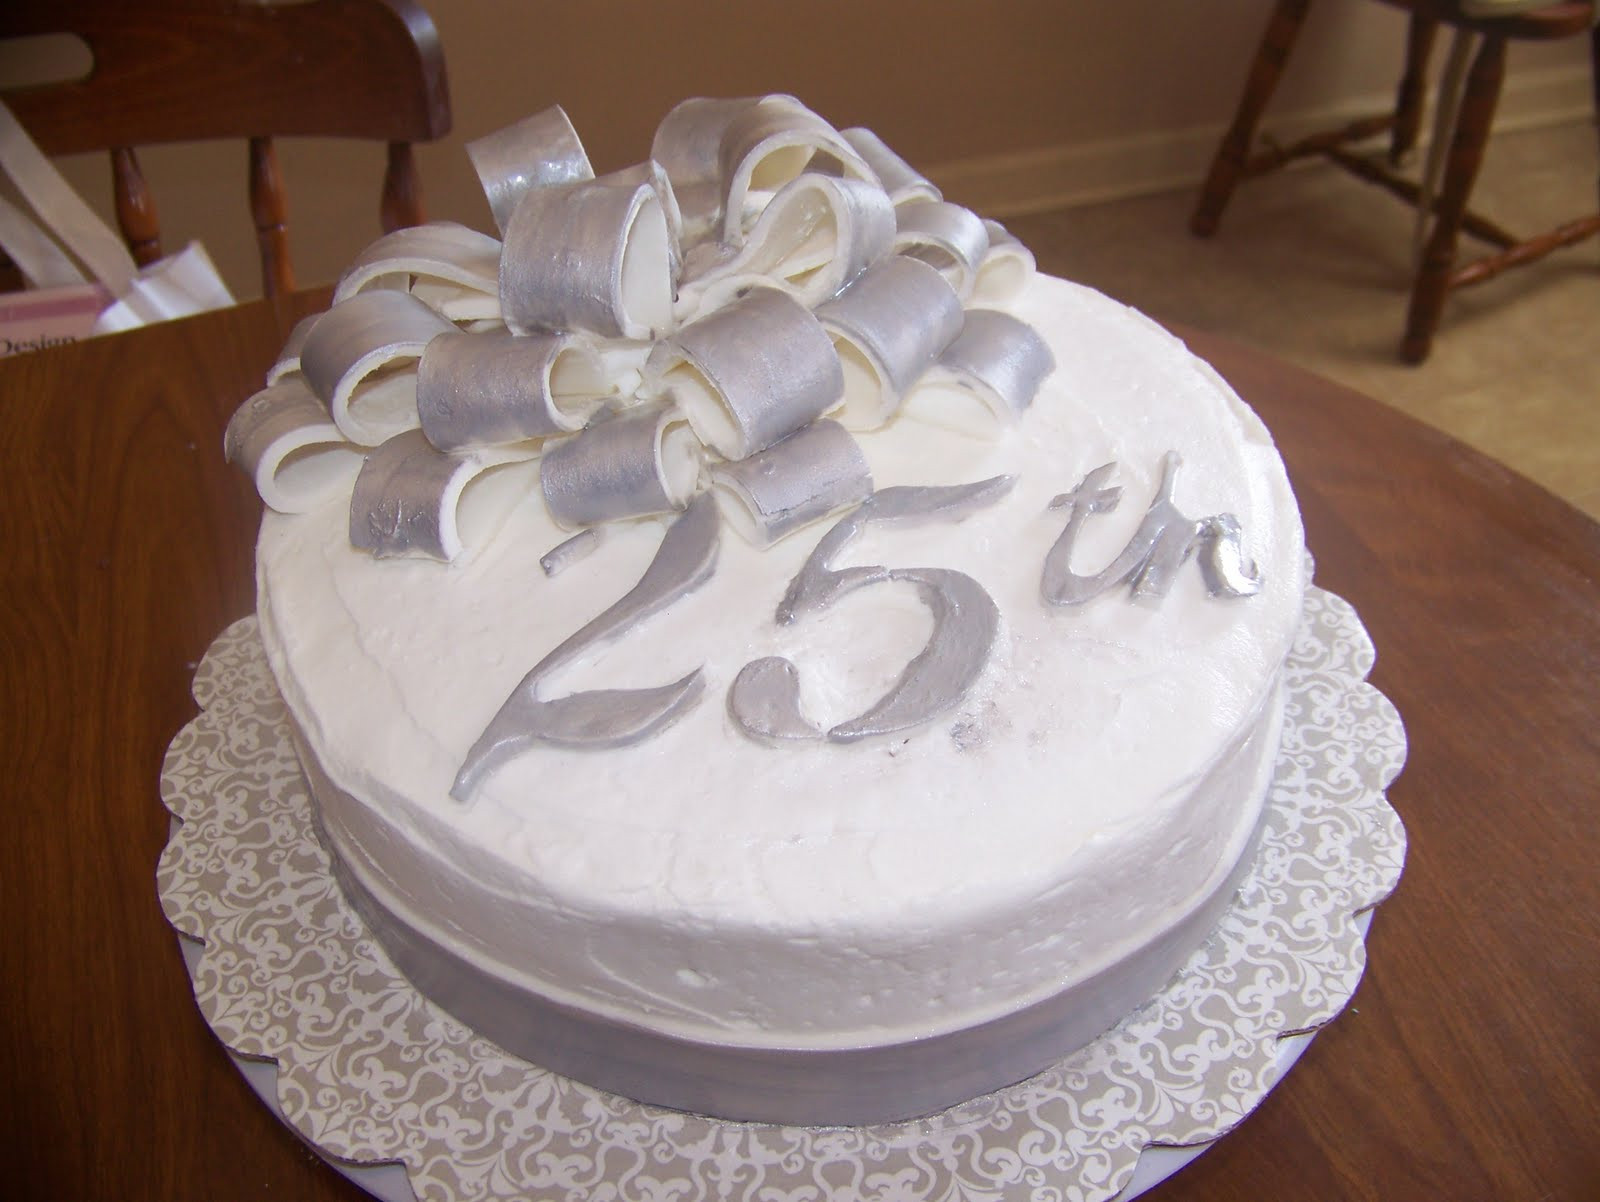 Wedding Anniversary Cakes
 How to Throw a Memorable 25th Wedding Anniversary Party